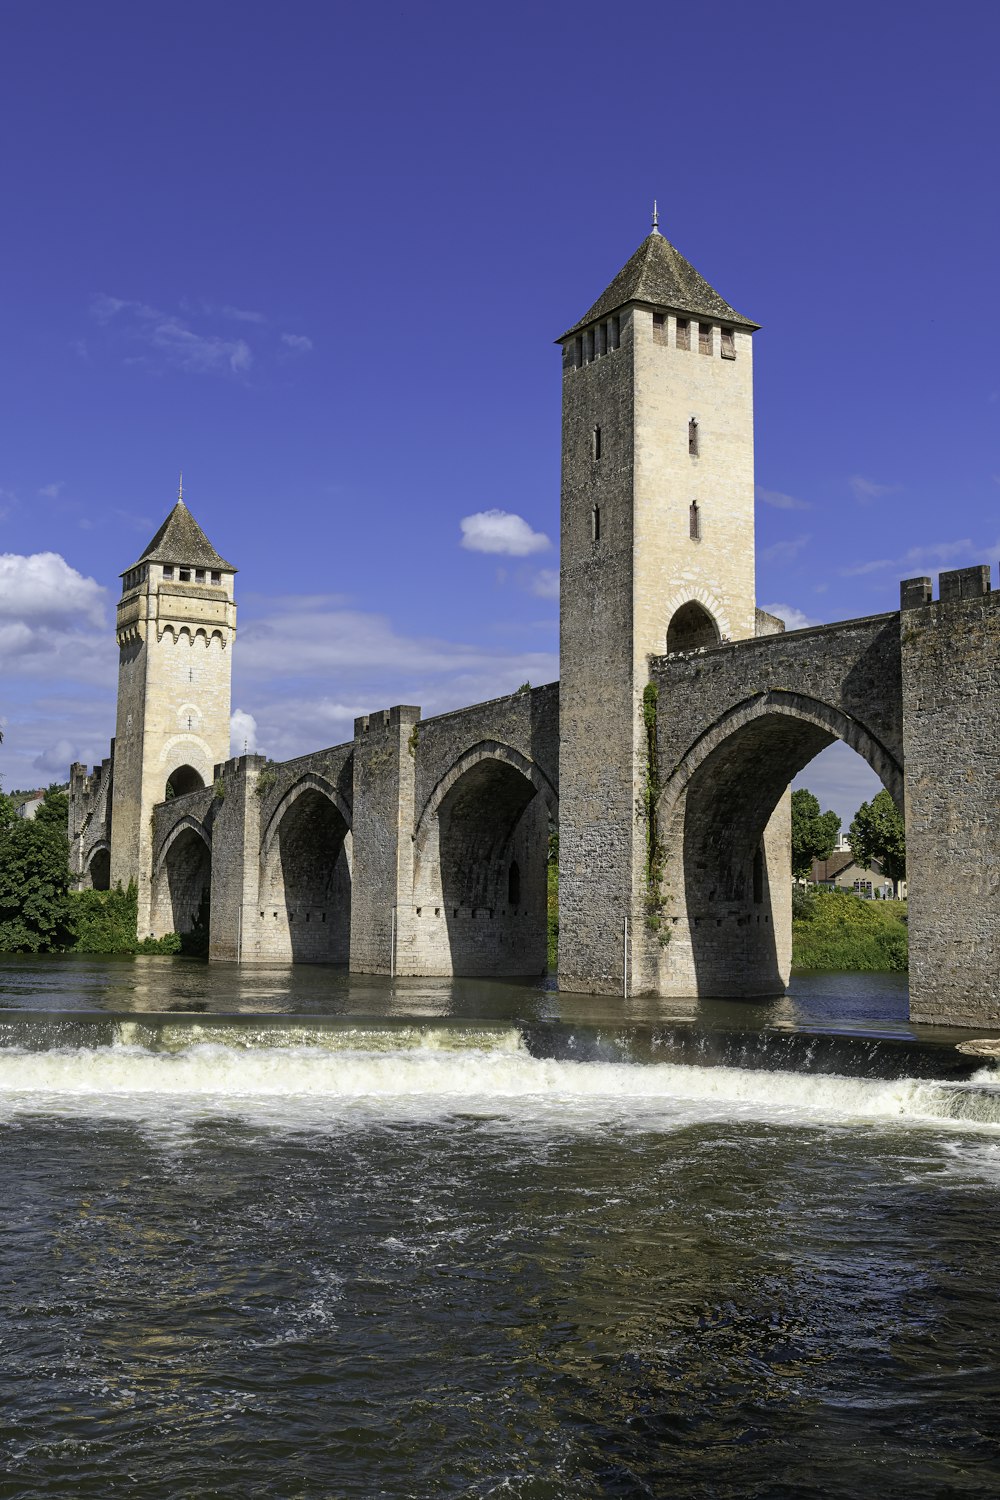 a stone bridge with towers